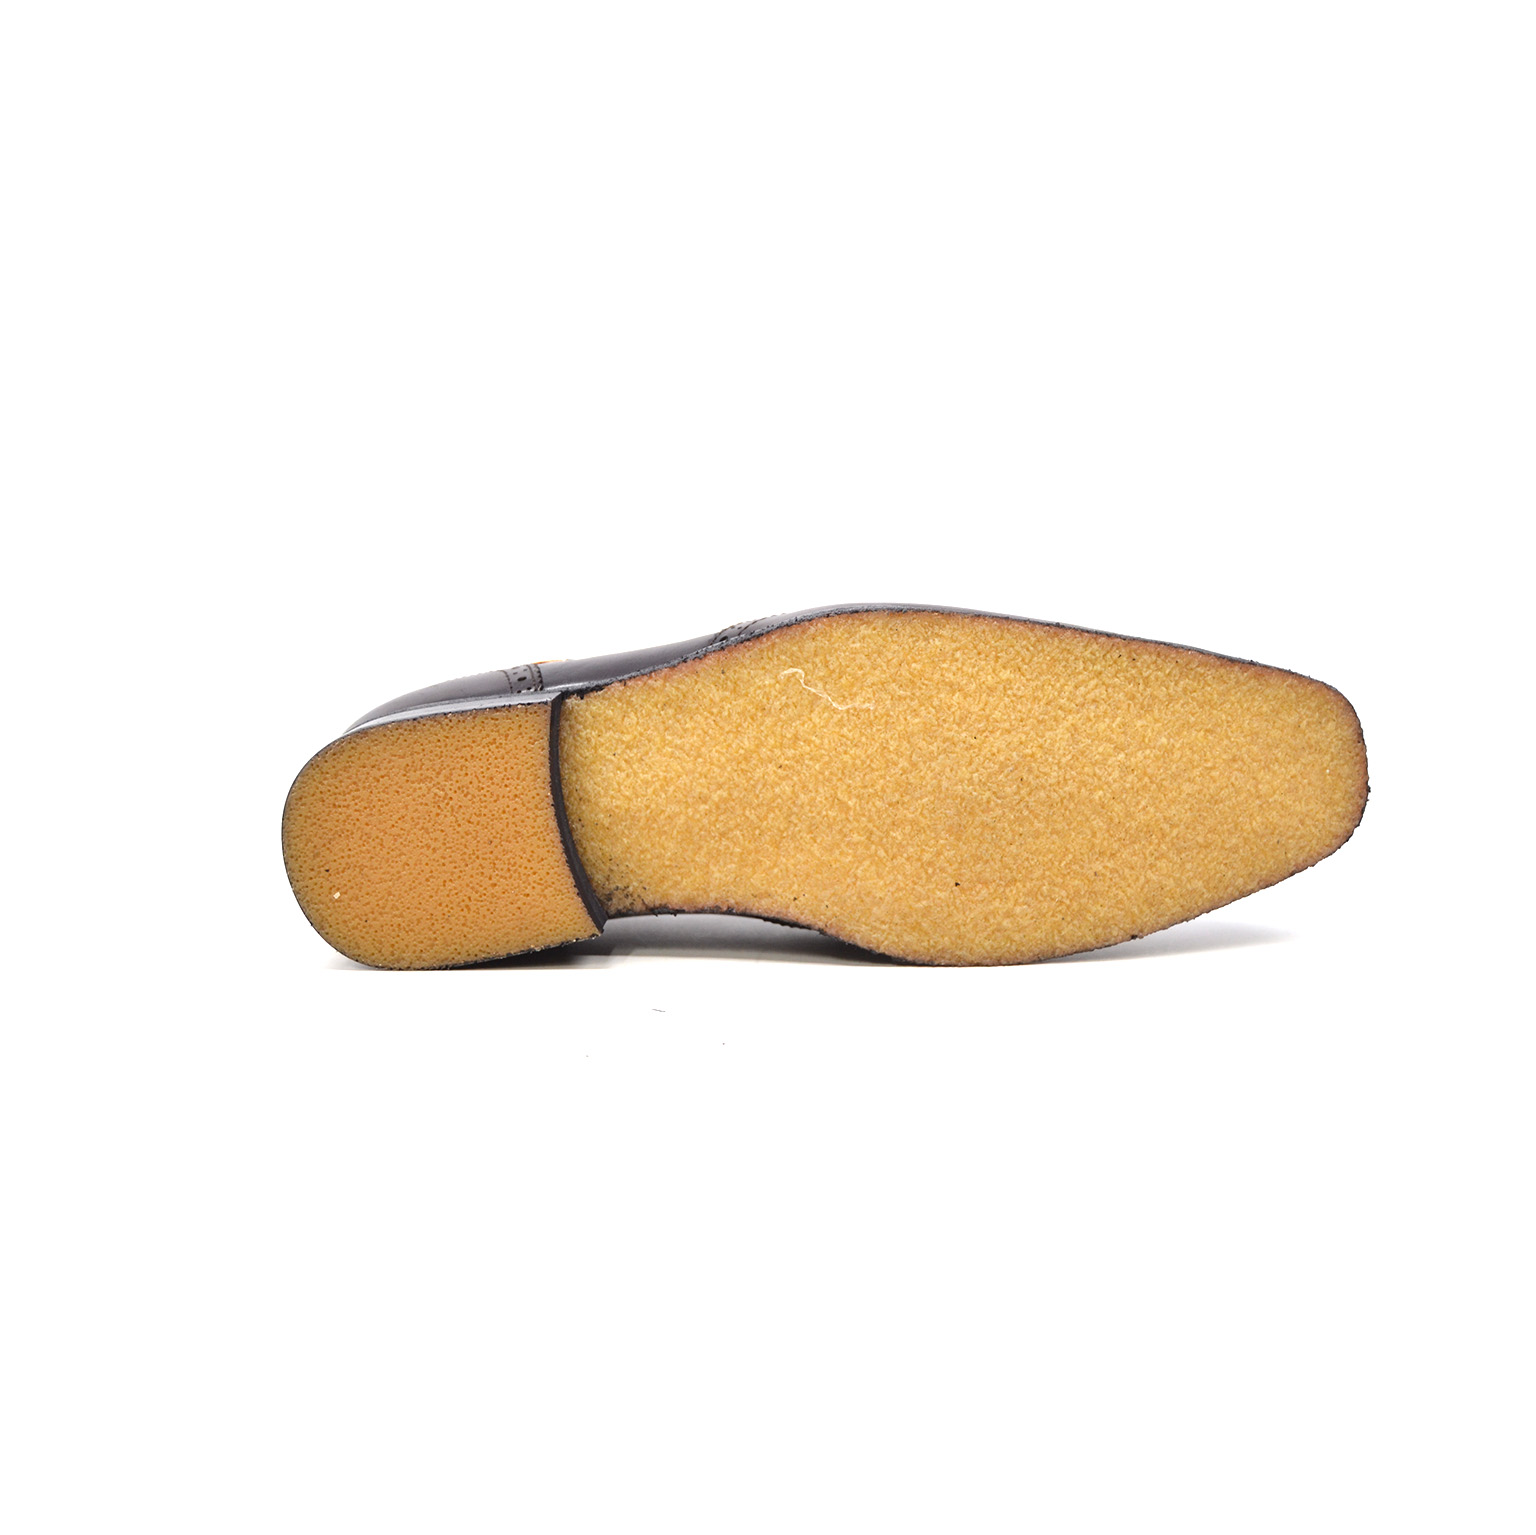 British Collection Rick Brown Leather Slip-on [203-2] - $145.00 ...